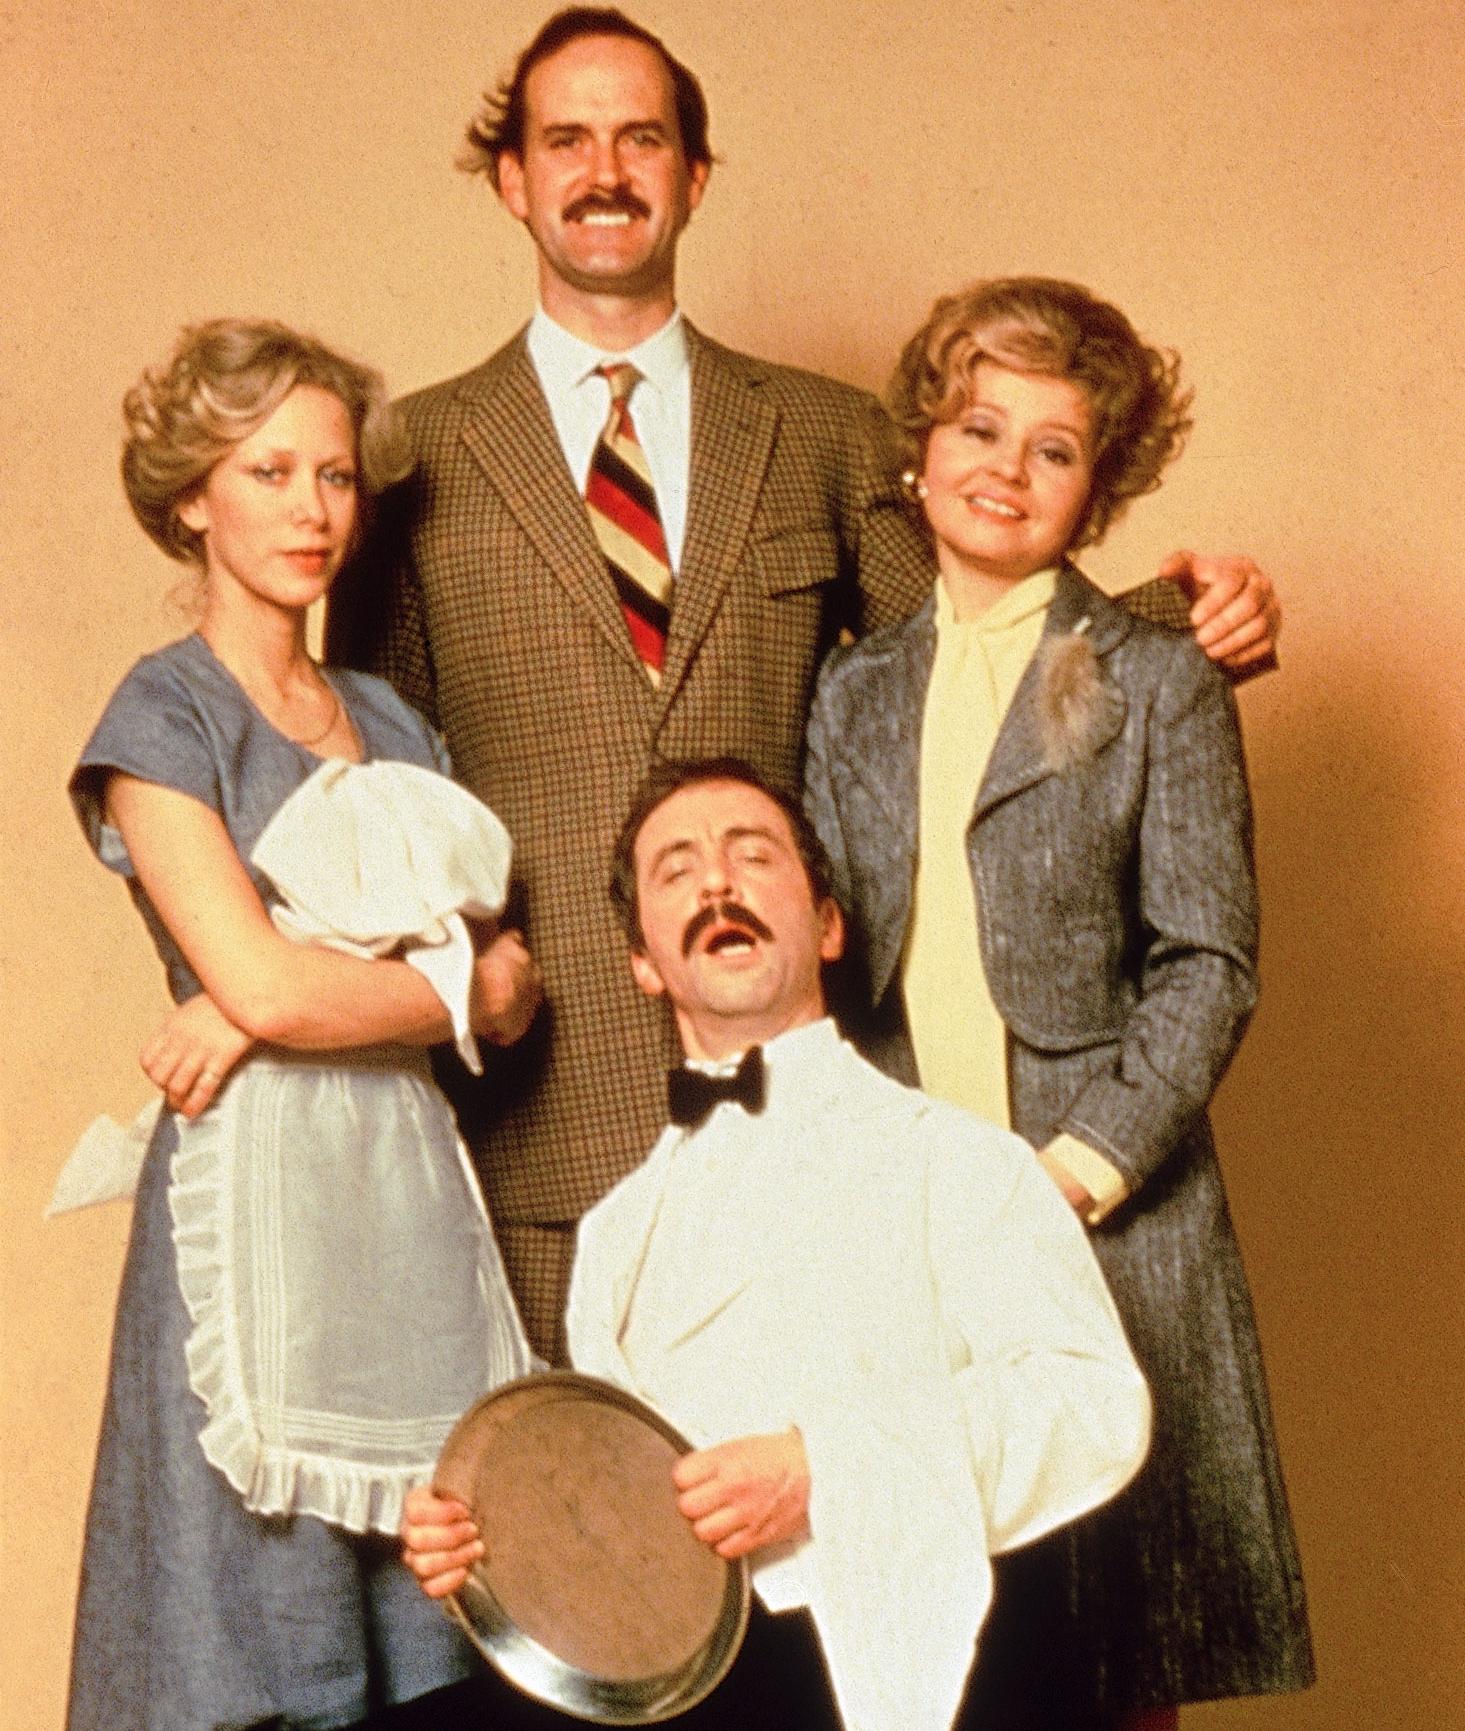 Connie Booth, John Cleese, Prunella Scales och Andrew Sachs i ”Pang i bygget”.